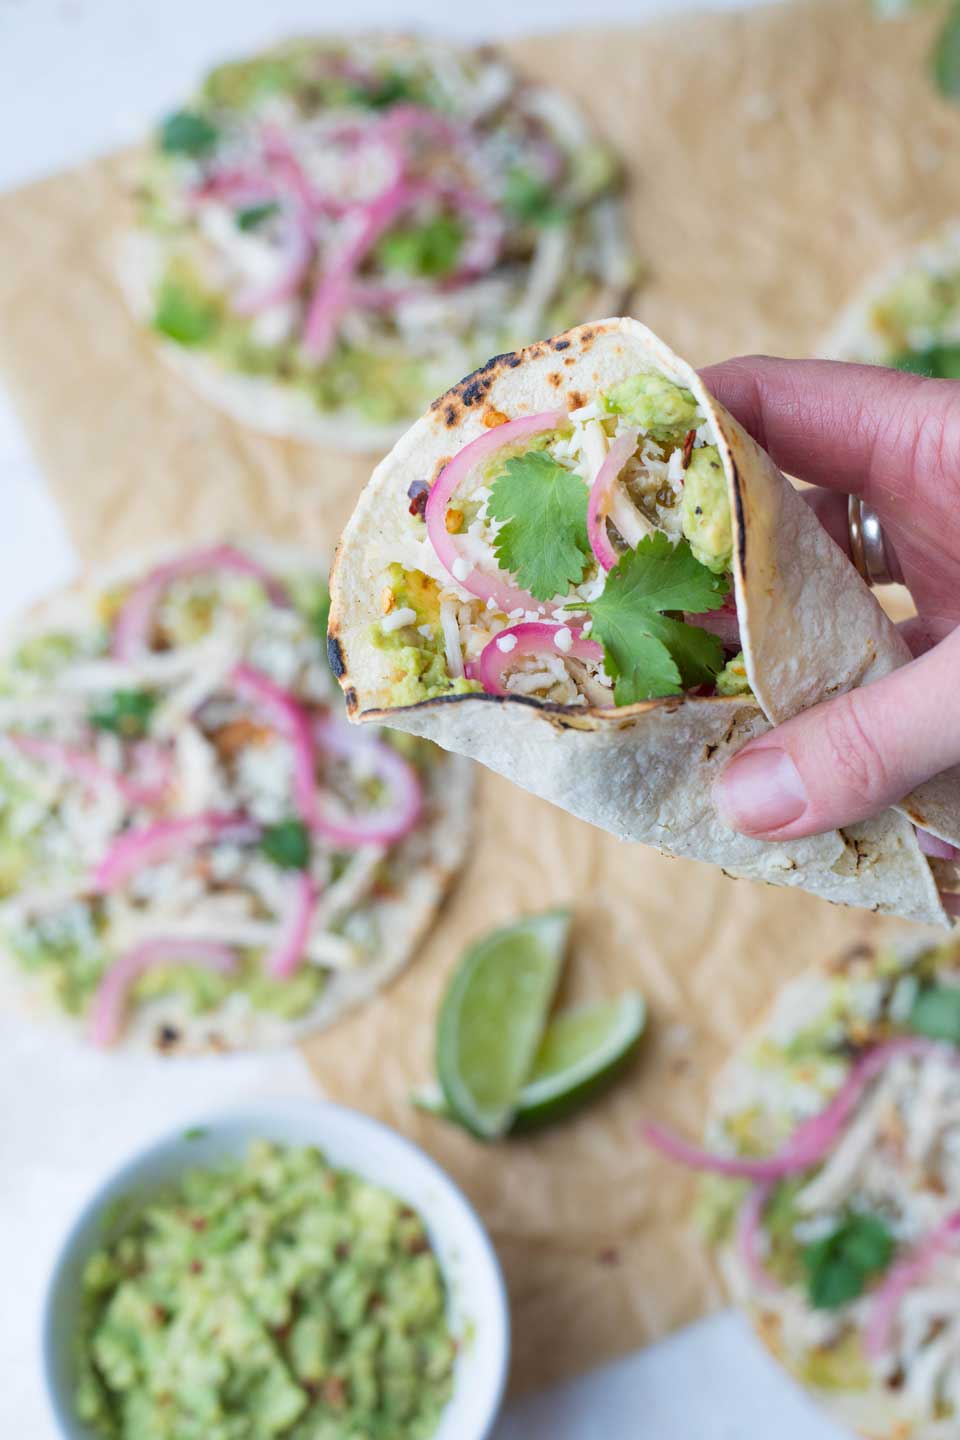 Tacos with rotisserie chicken? What could be easier? And with all these scrumptious toppings choices, what could be more delicious? This recipe will be your new go-to make-ahead meal!